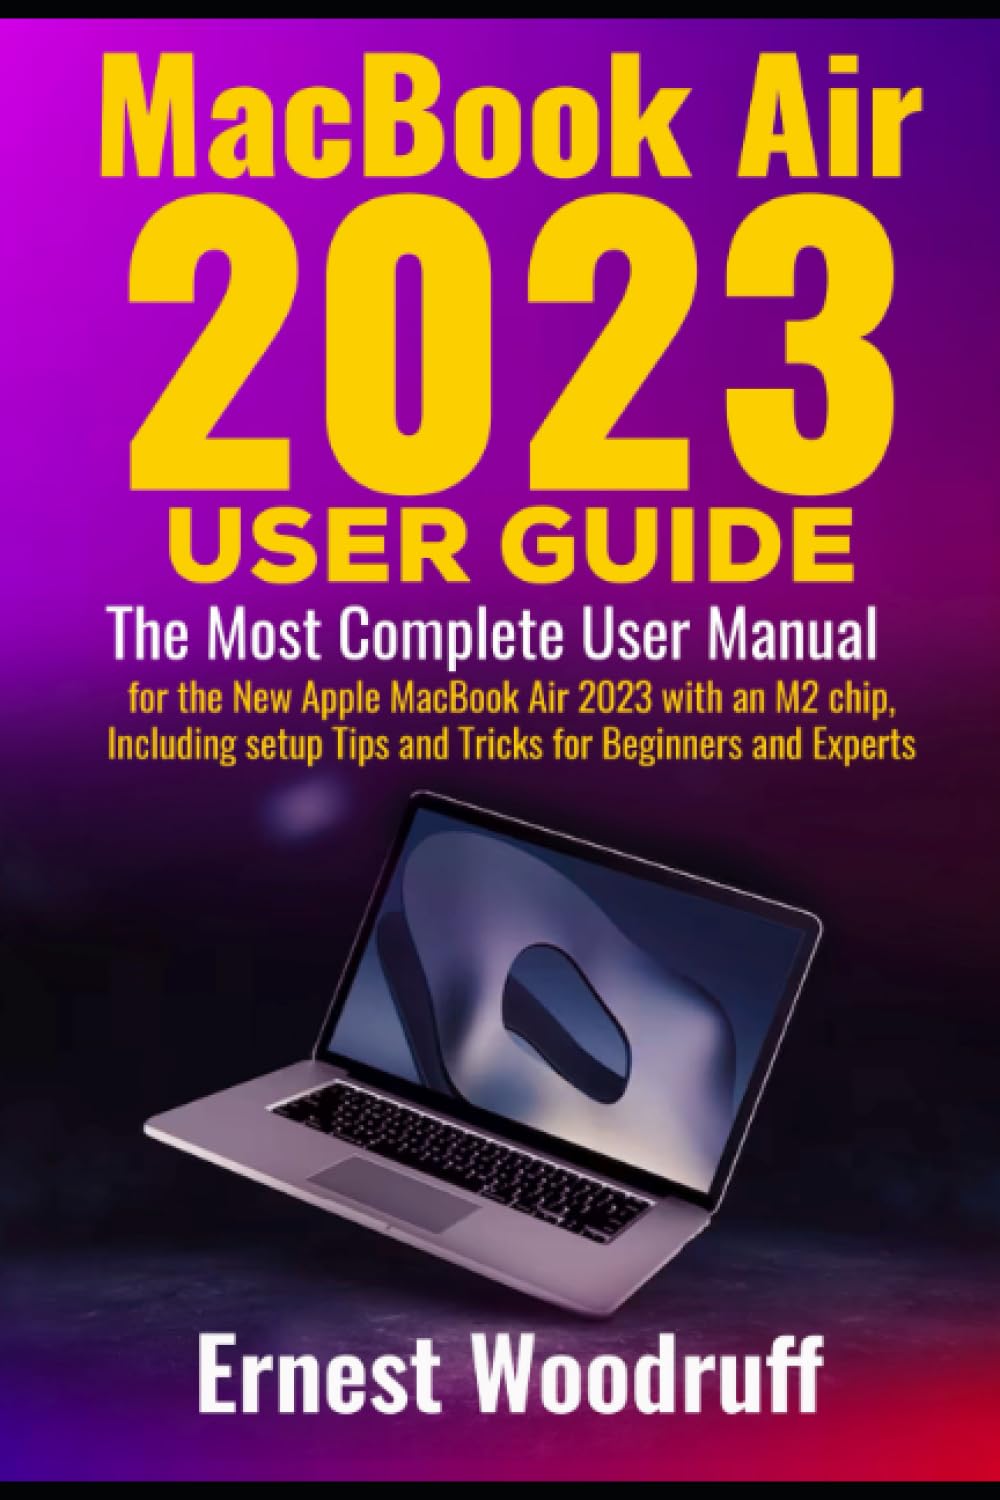 MacBook Air 2023 User Guide: The Most Complete User Manual for the New Apple MacBook Air 2023 with an M2 chip, Including setup Tips and Tricks for Beginners and Experts